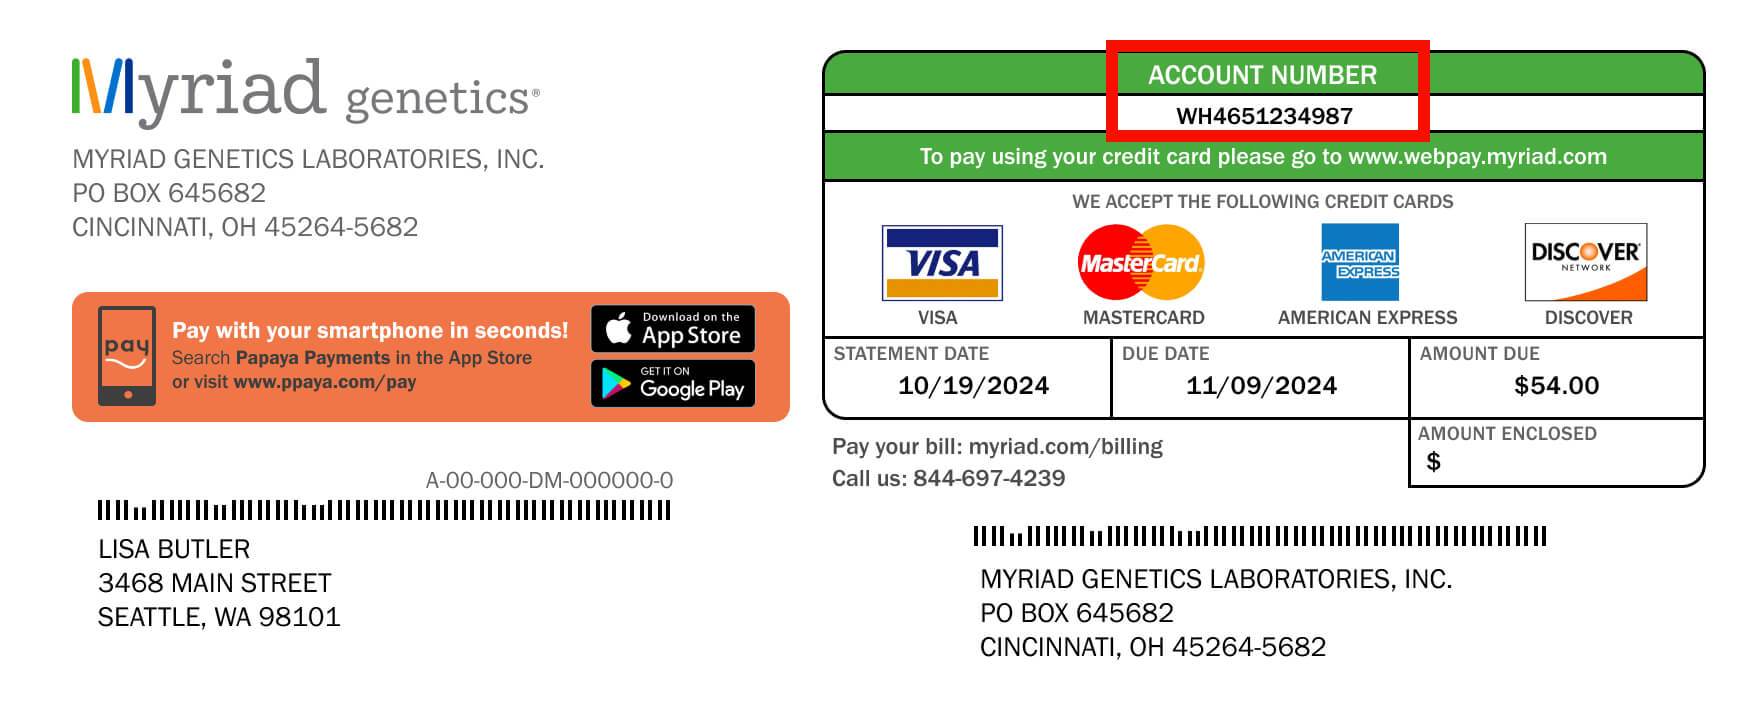 Example of a bill from Myriad